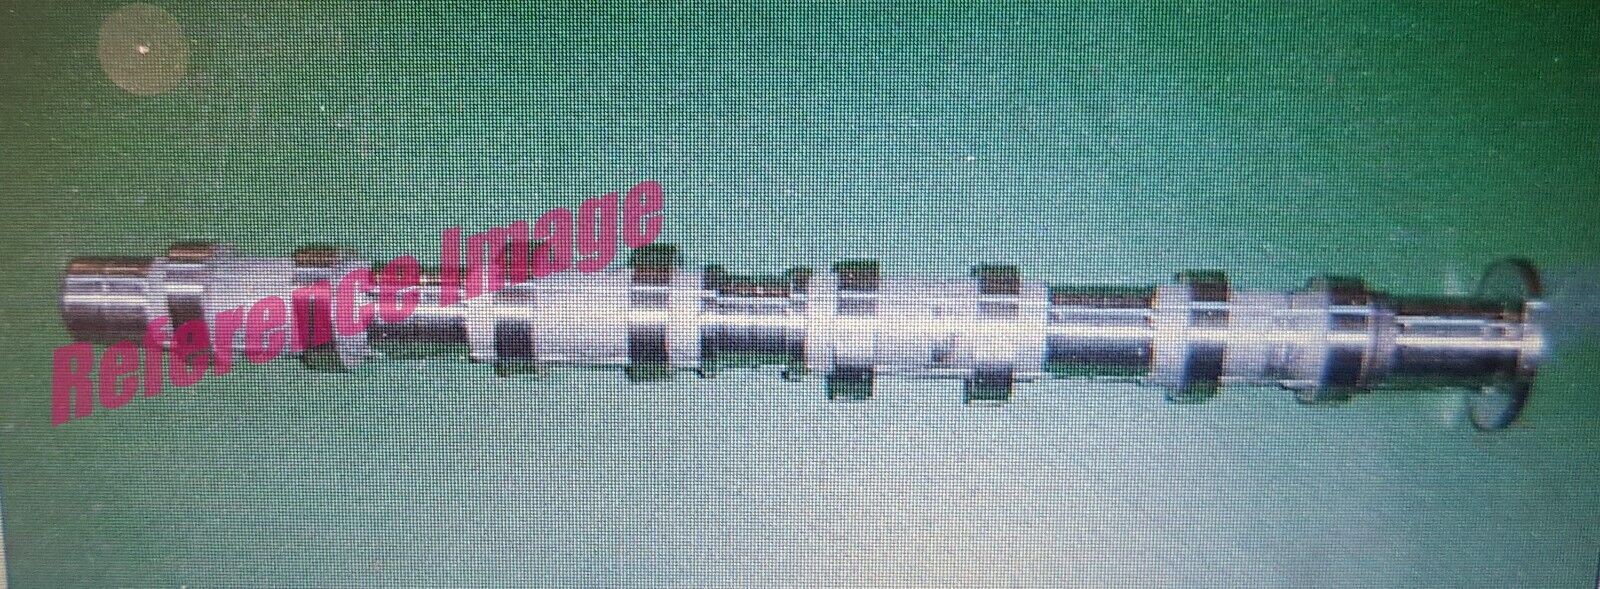 Genuine Intake Camshaft #1620506101 for Ssangyong REXTON,CHAIRMAN +E32 Express